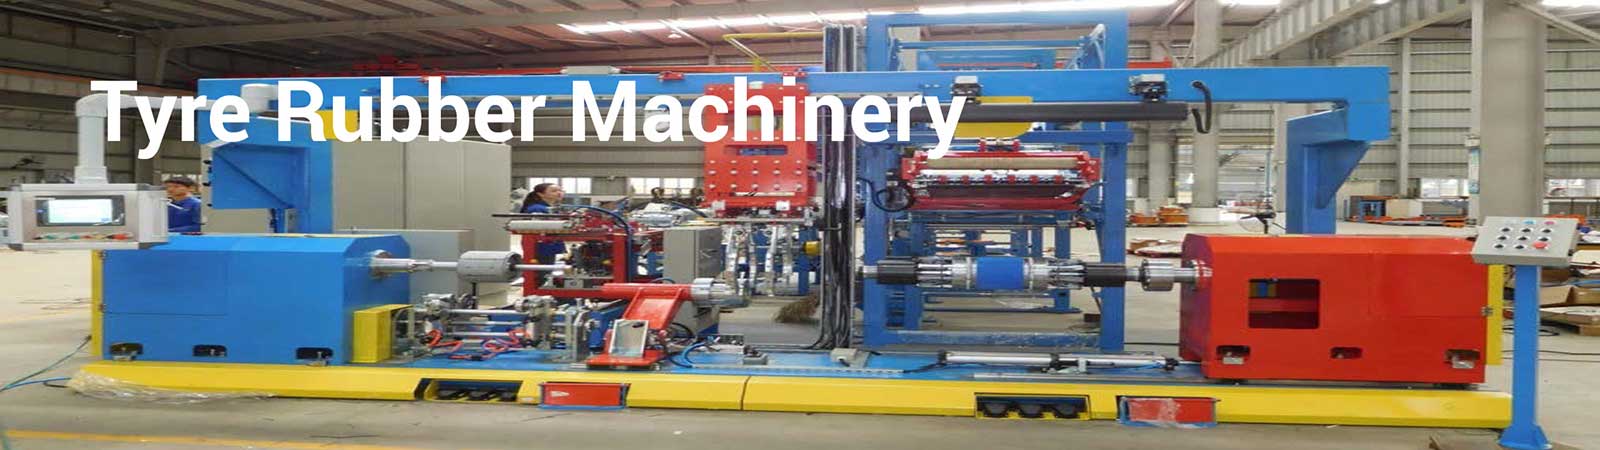 Tyre-Rubber-Machinery